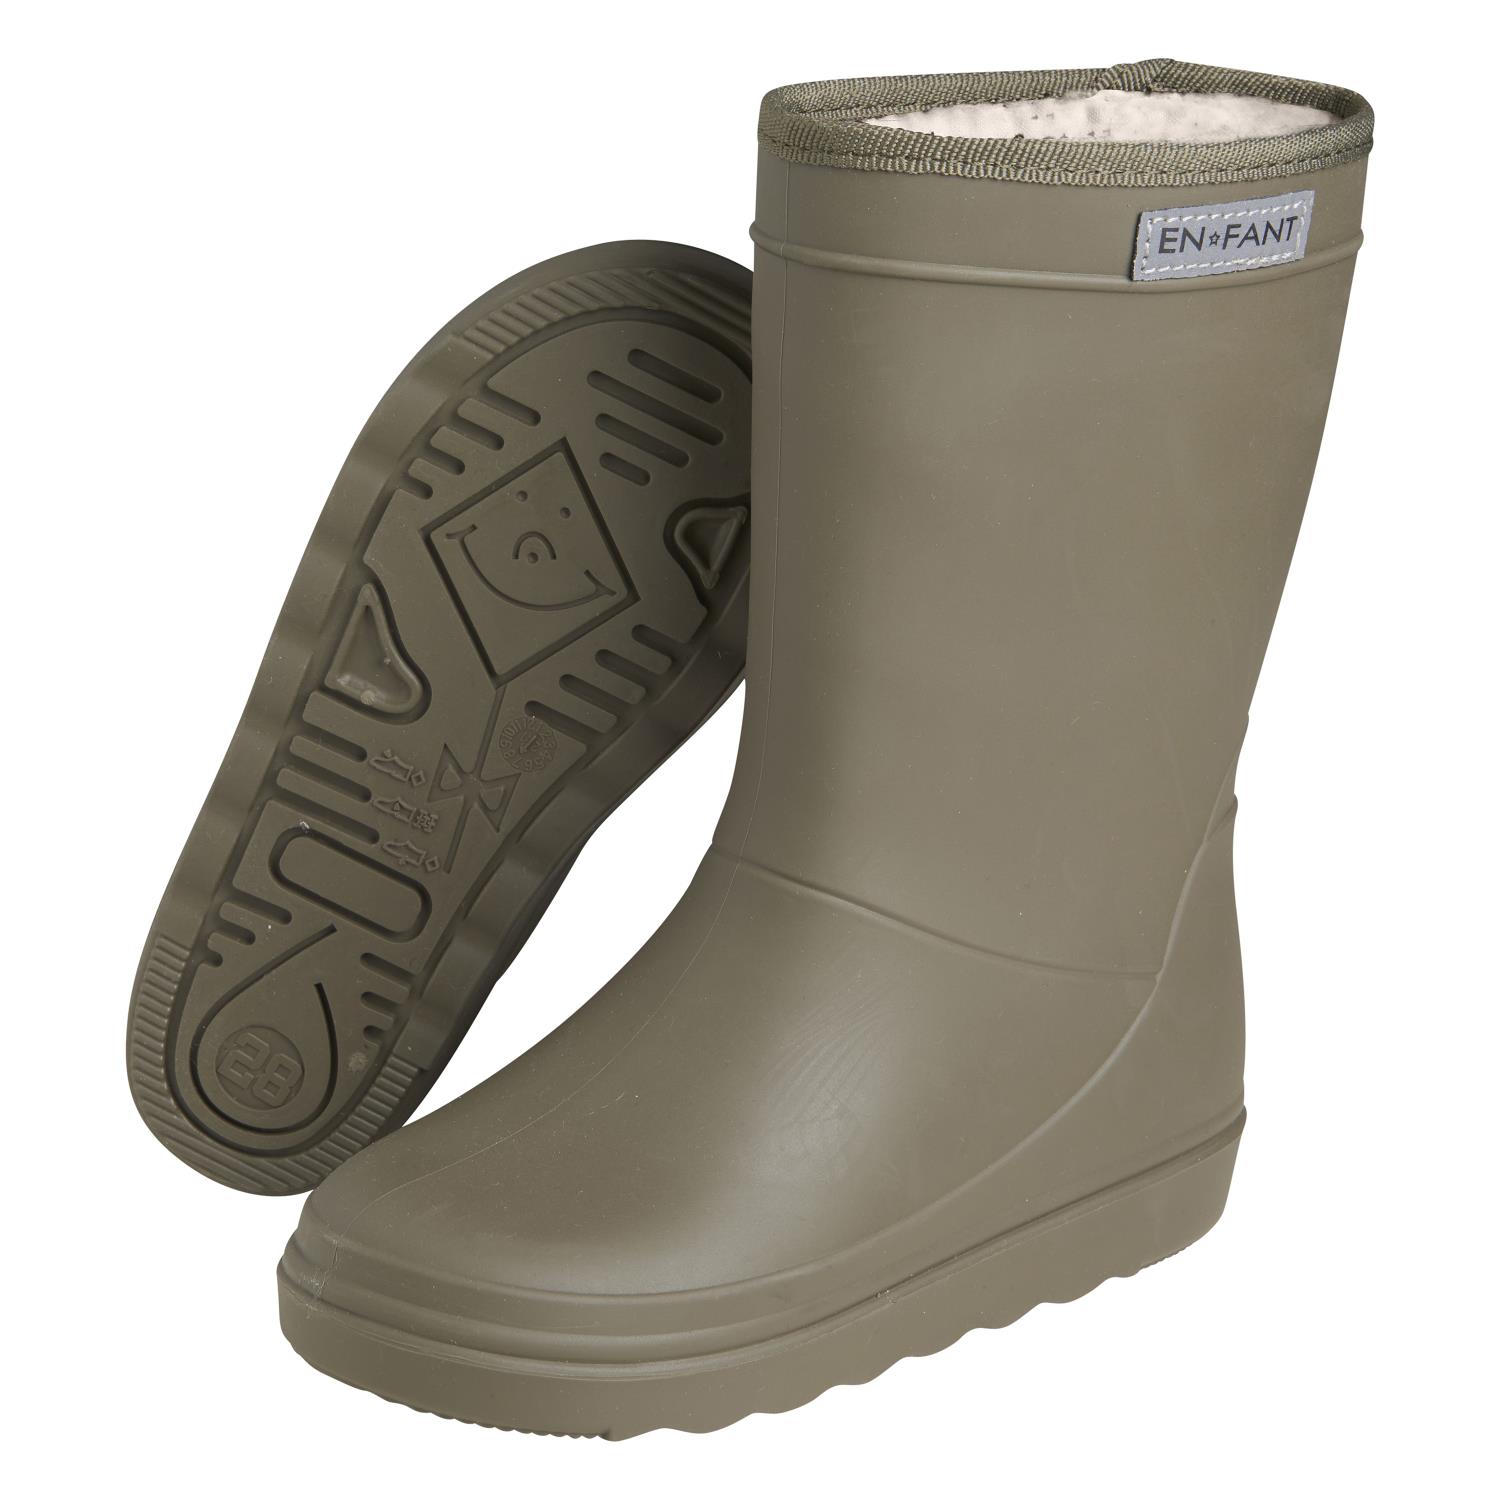 En-Fant Thermo Boots, Ivy Green(1)